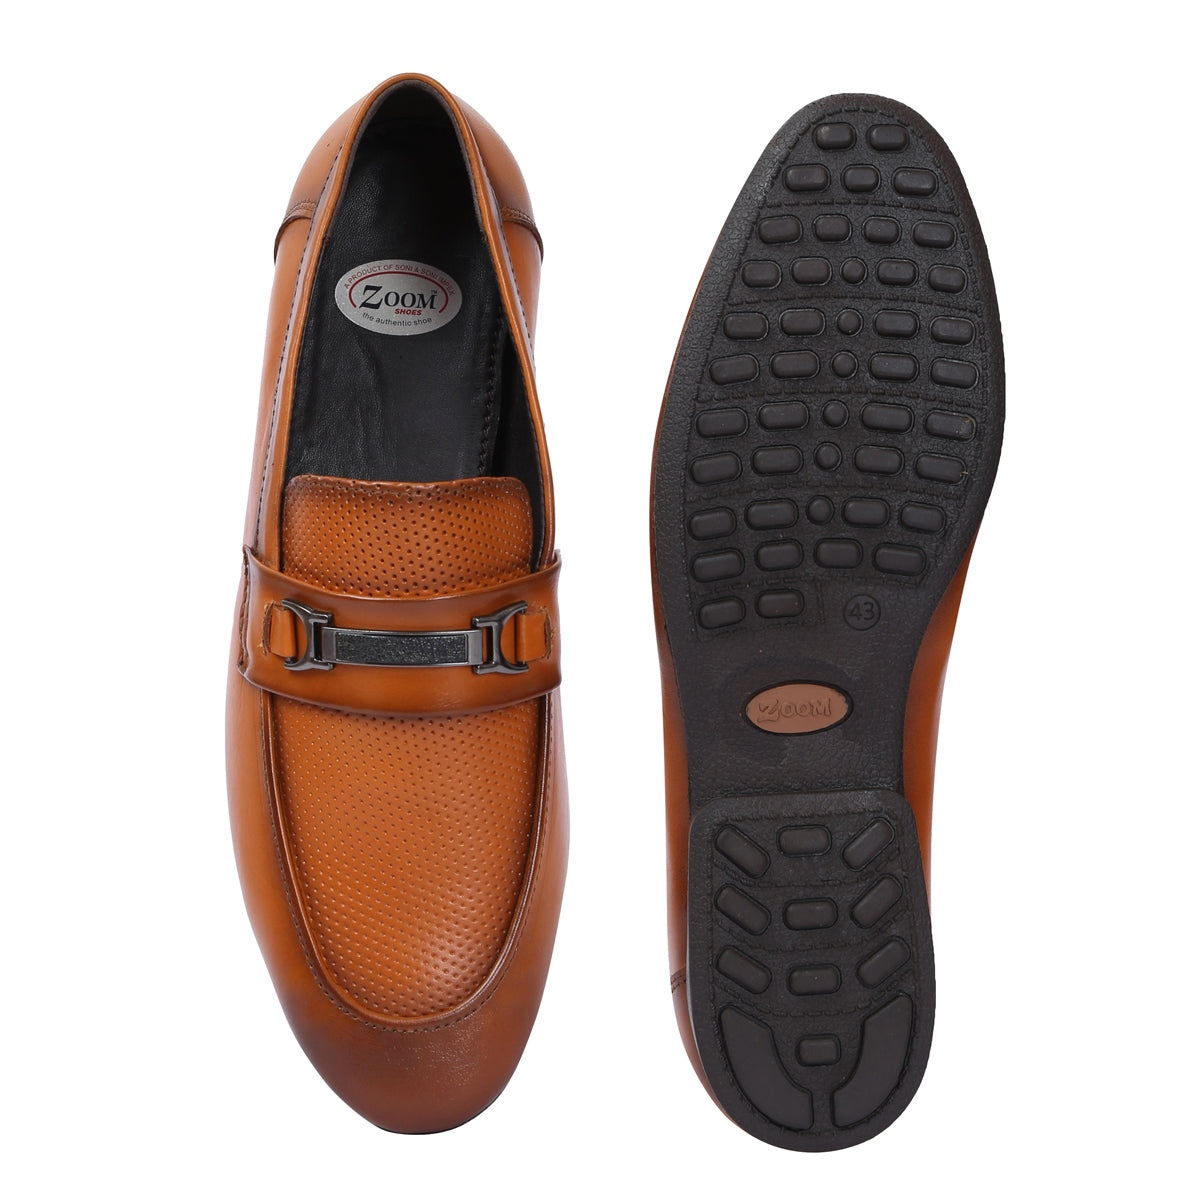 Textured Casual Slip-On Shoes TM-21_tan4